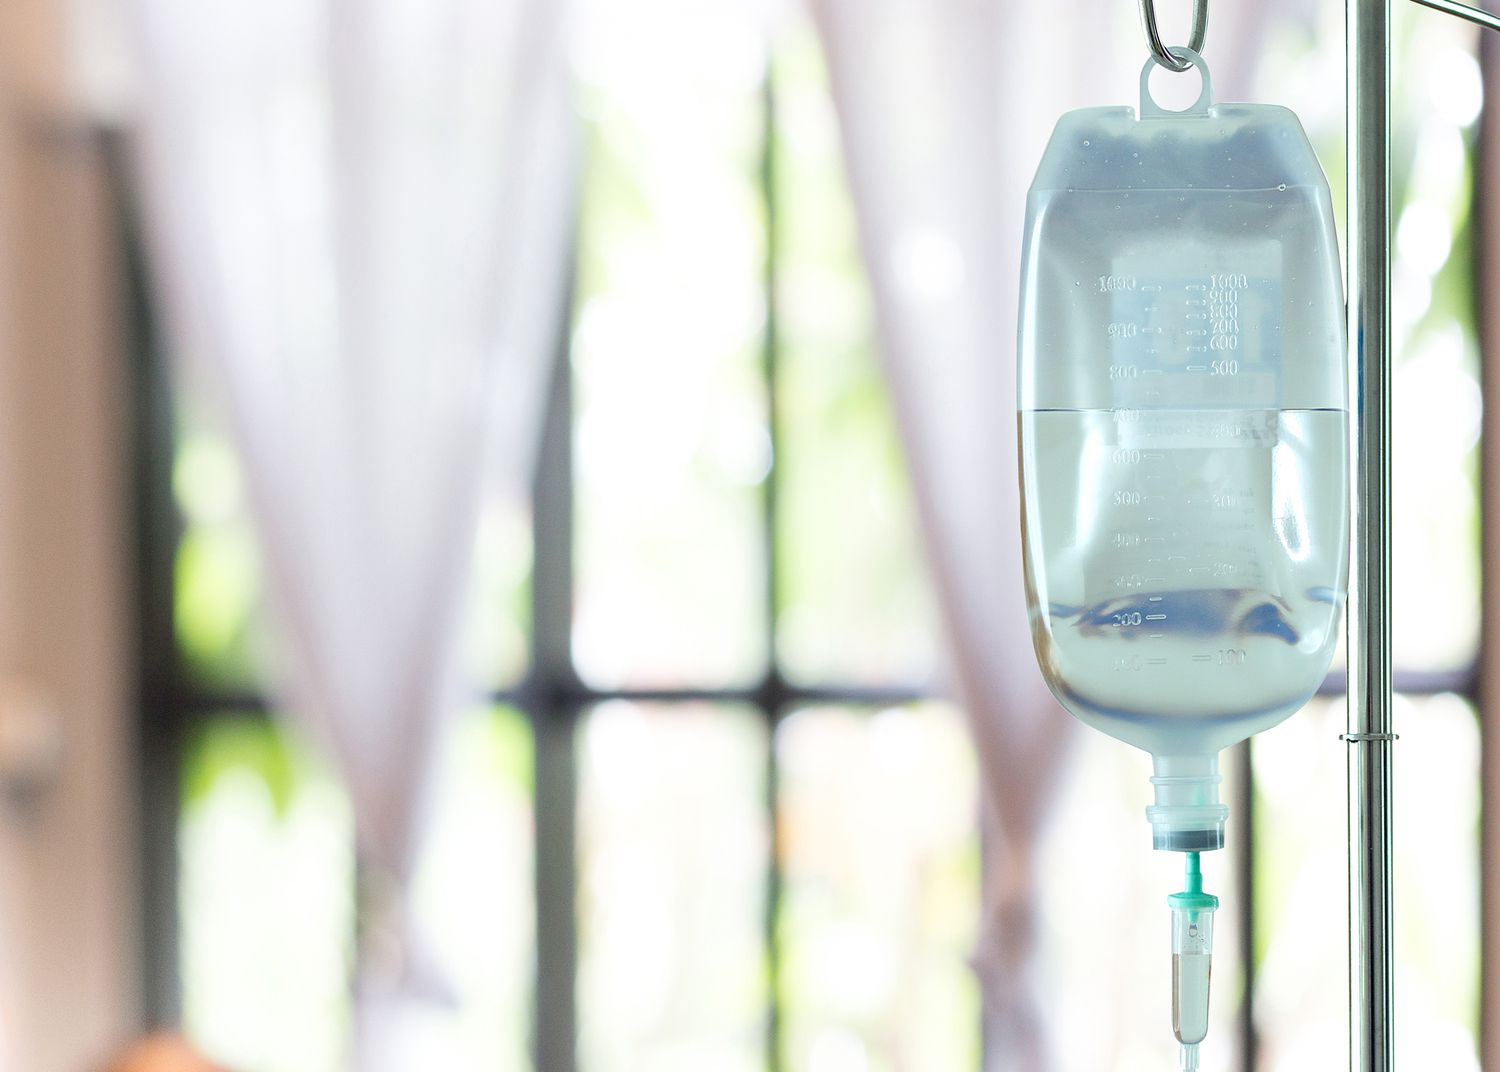 Bringing Comfort Home: Exploring the Ease of IV Fluids at Home